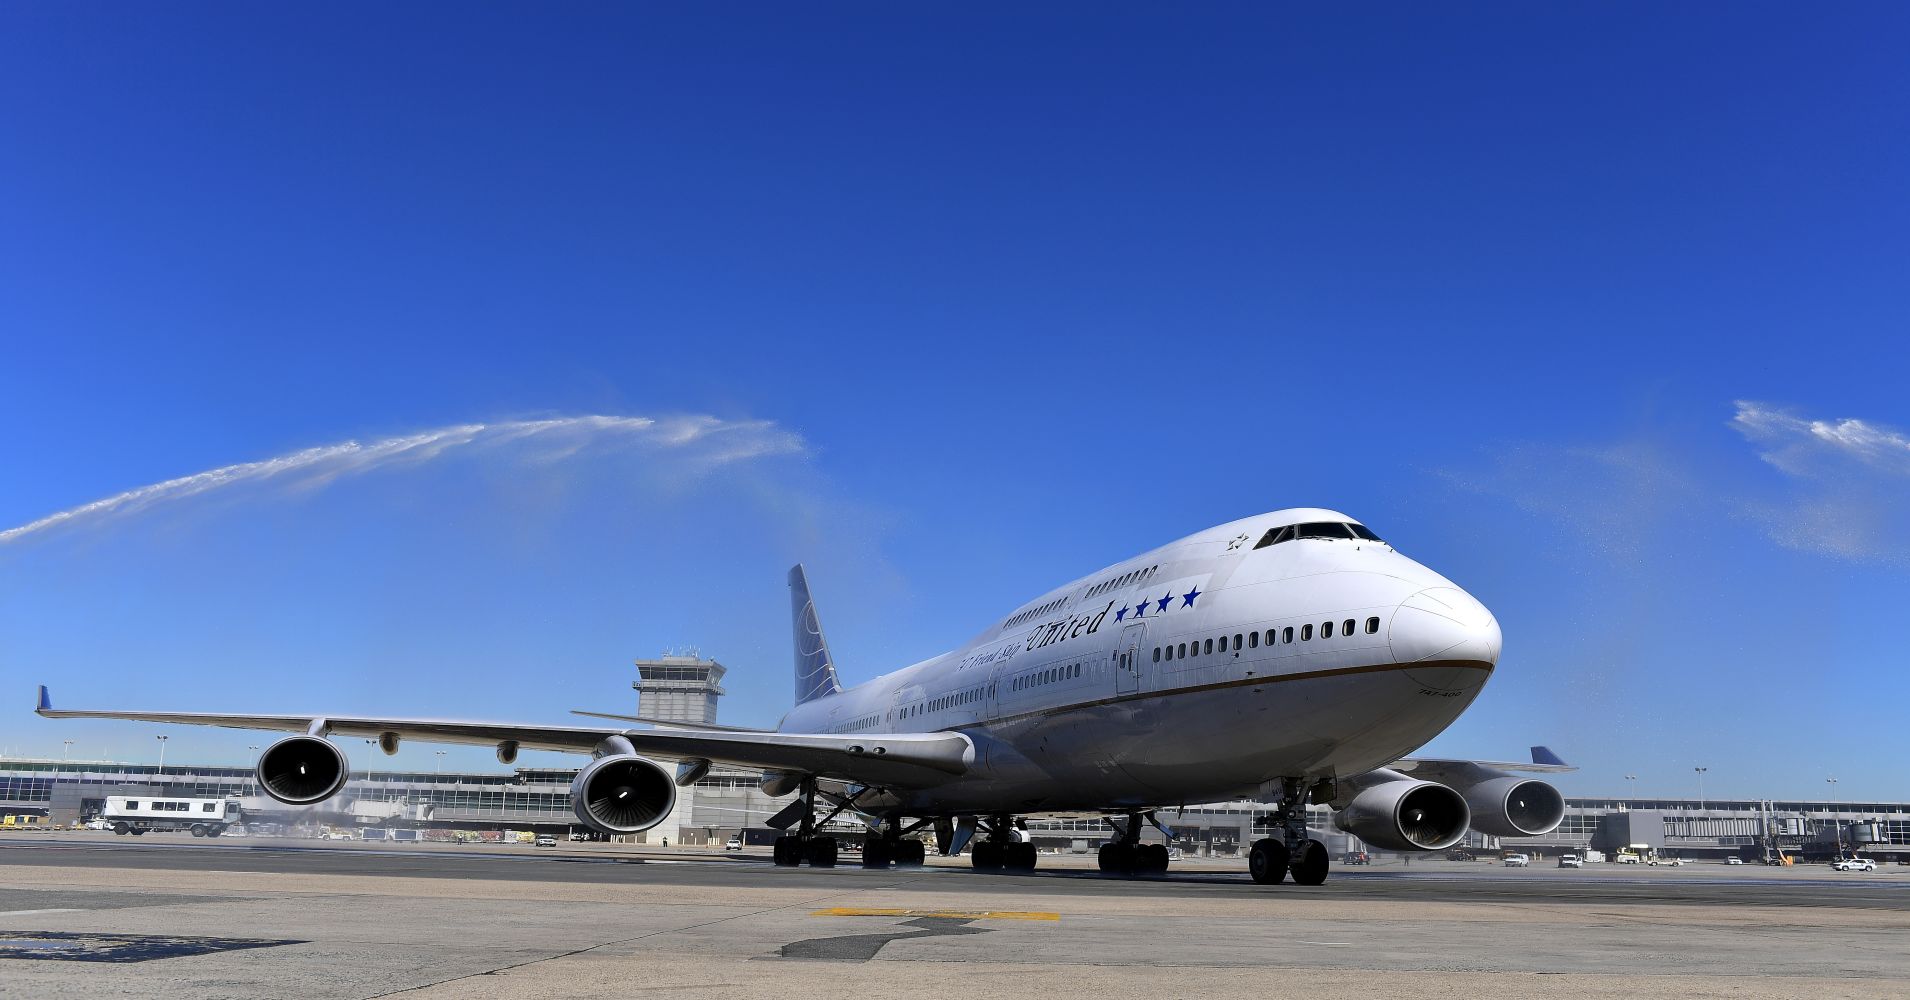 The last United Airlines 747 is greeted by water cannons after it makes its final landing at Dulles International Airport October 19, 2017 in Dulles, VA.